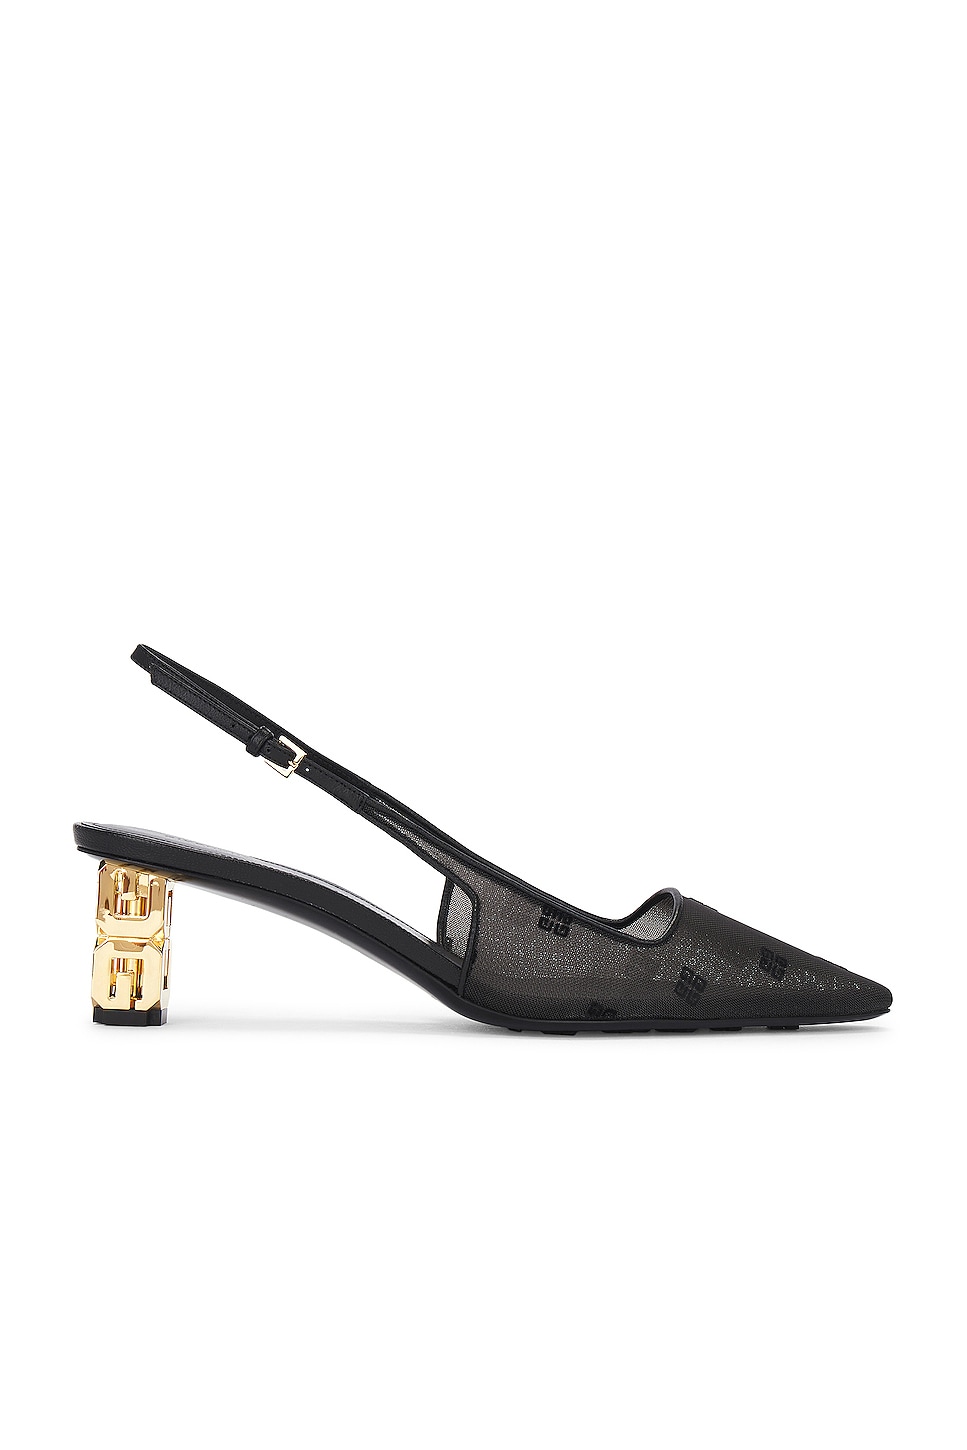 Image 1 of Givenchy G Cube Slingback Pump in Black